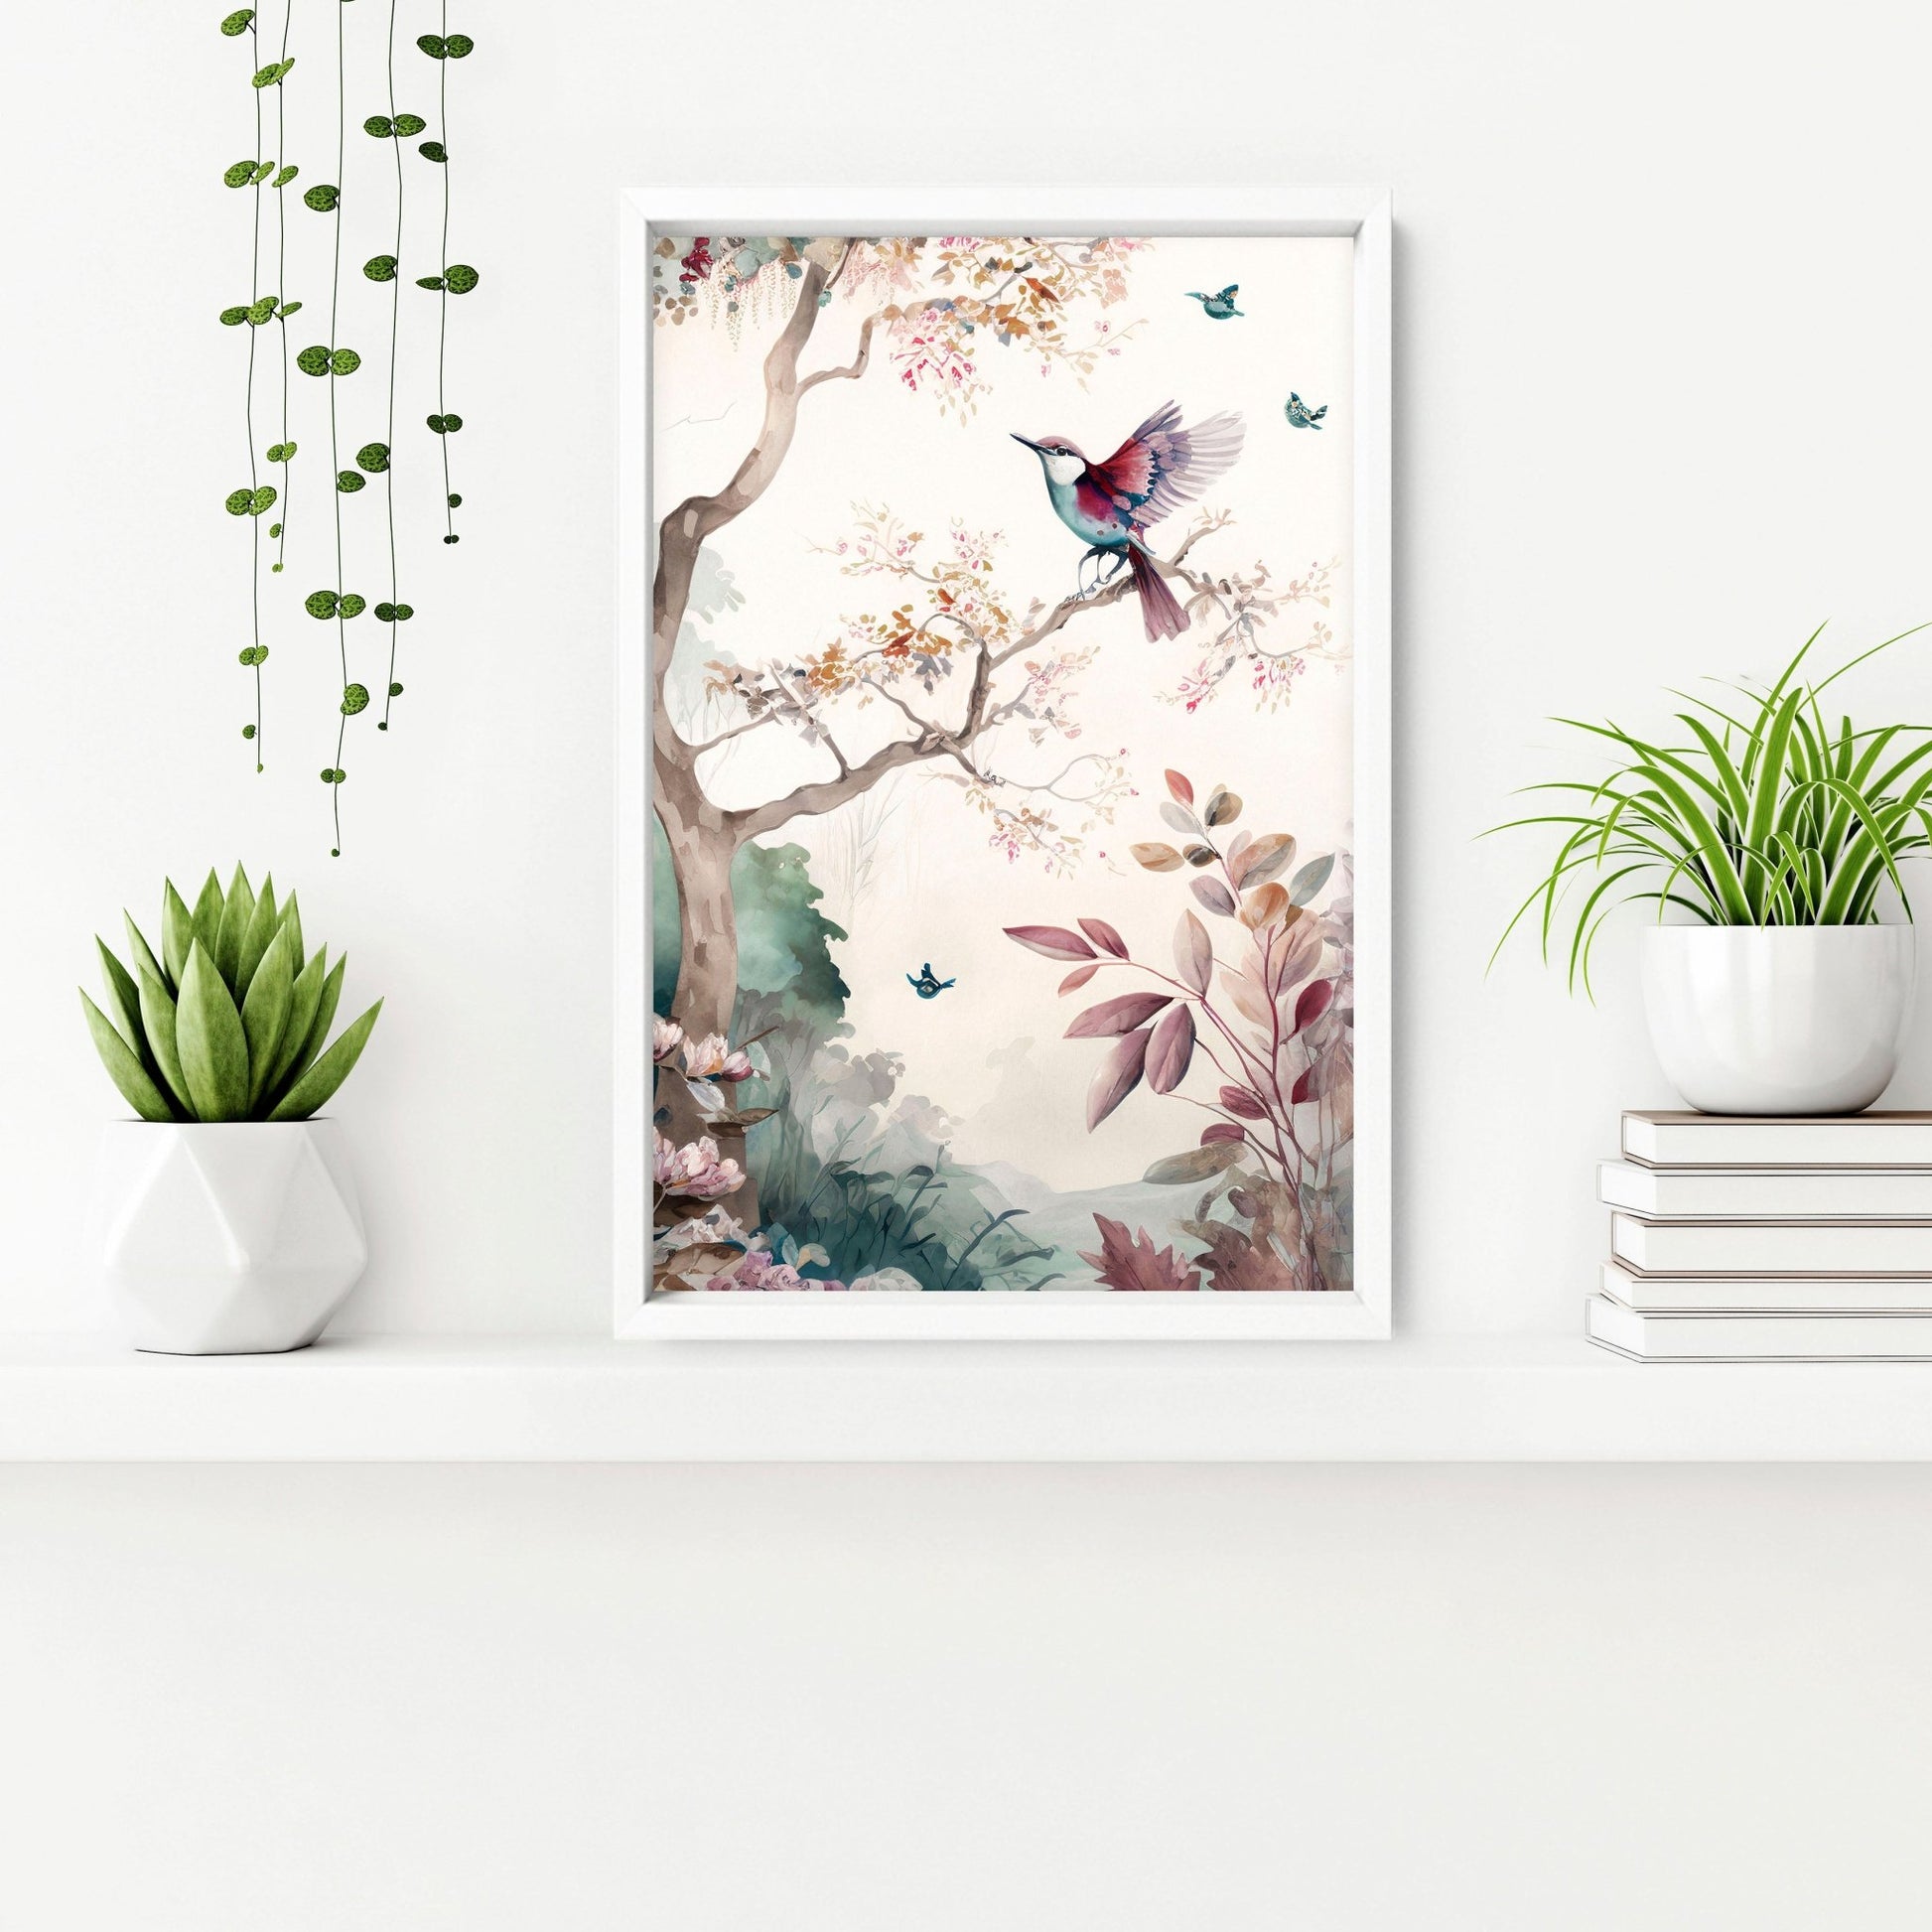 Chinoiserie Bathroom Wall decoration | set of 3 wall prints